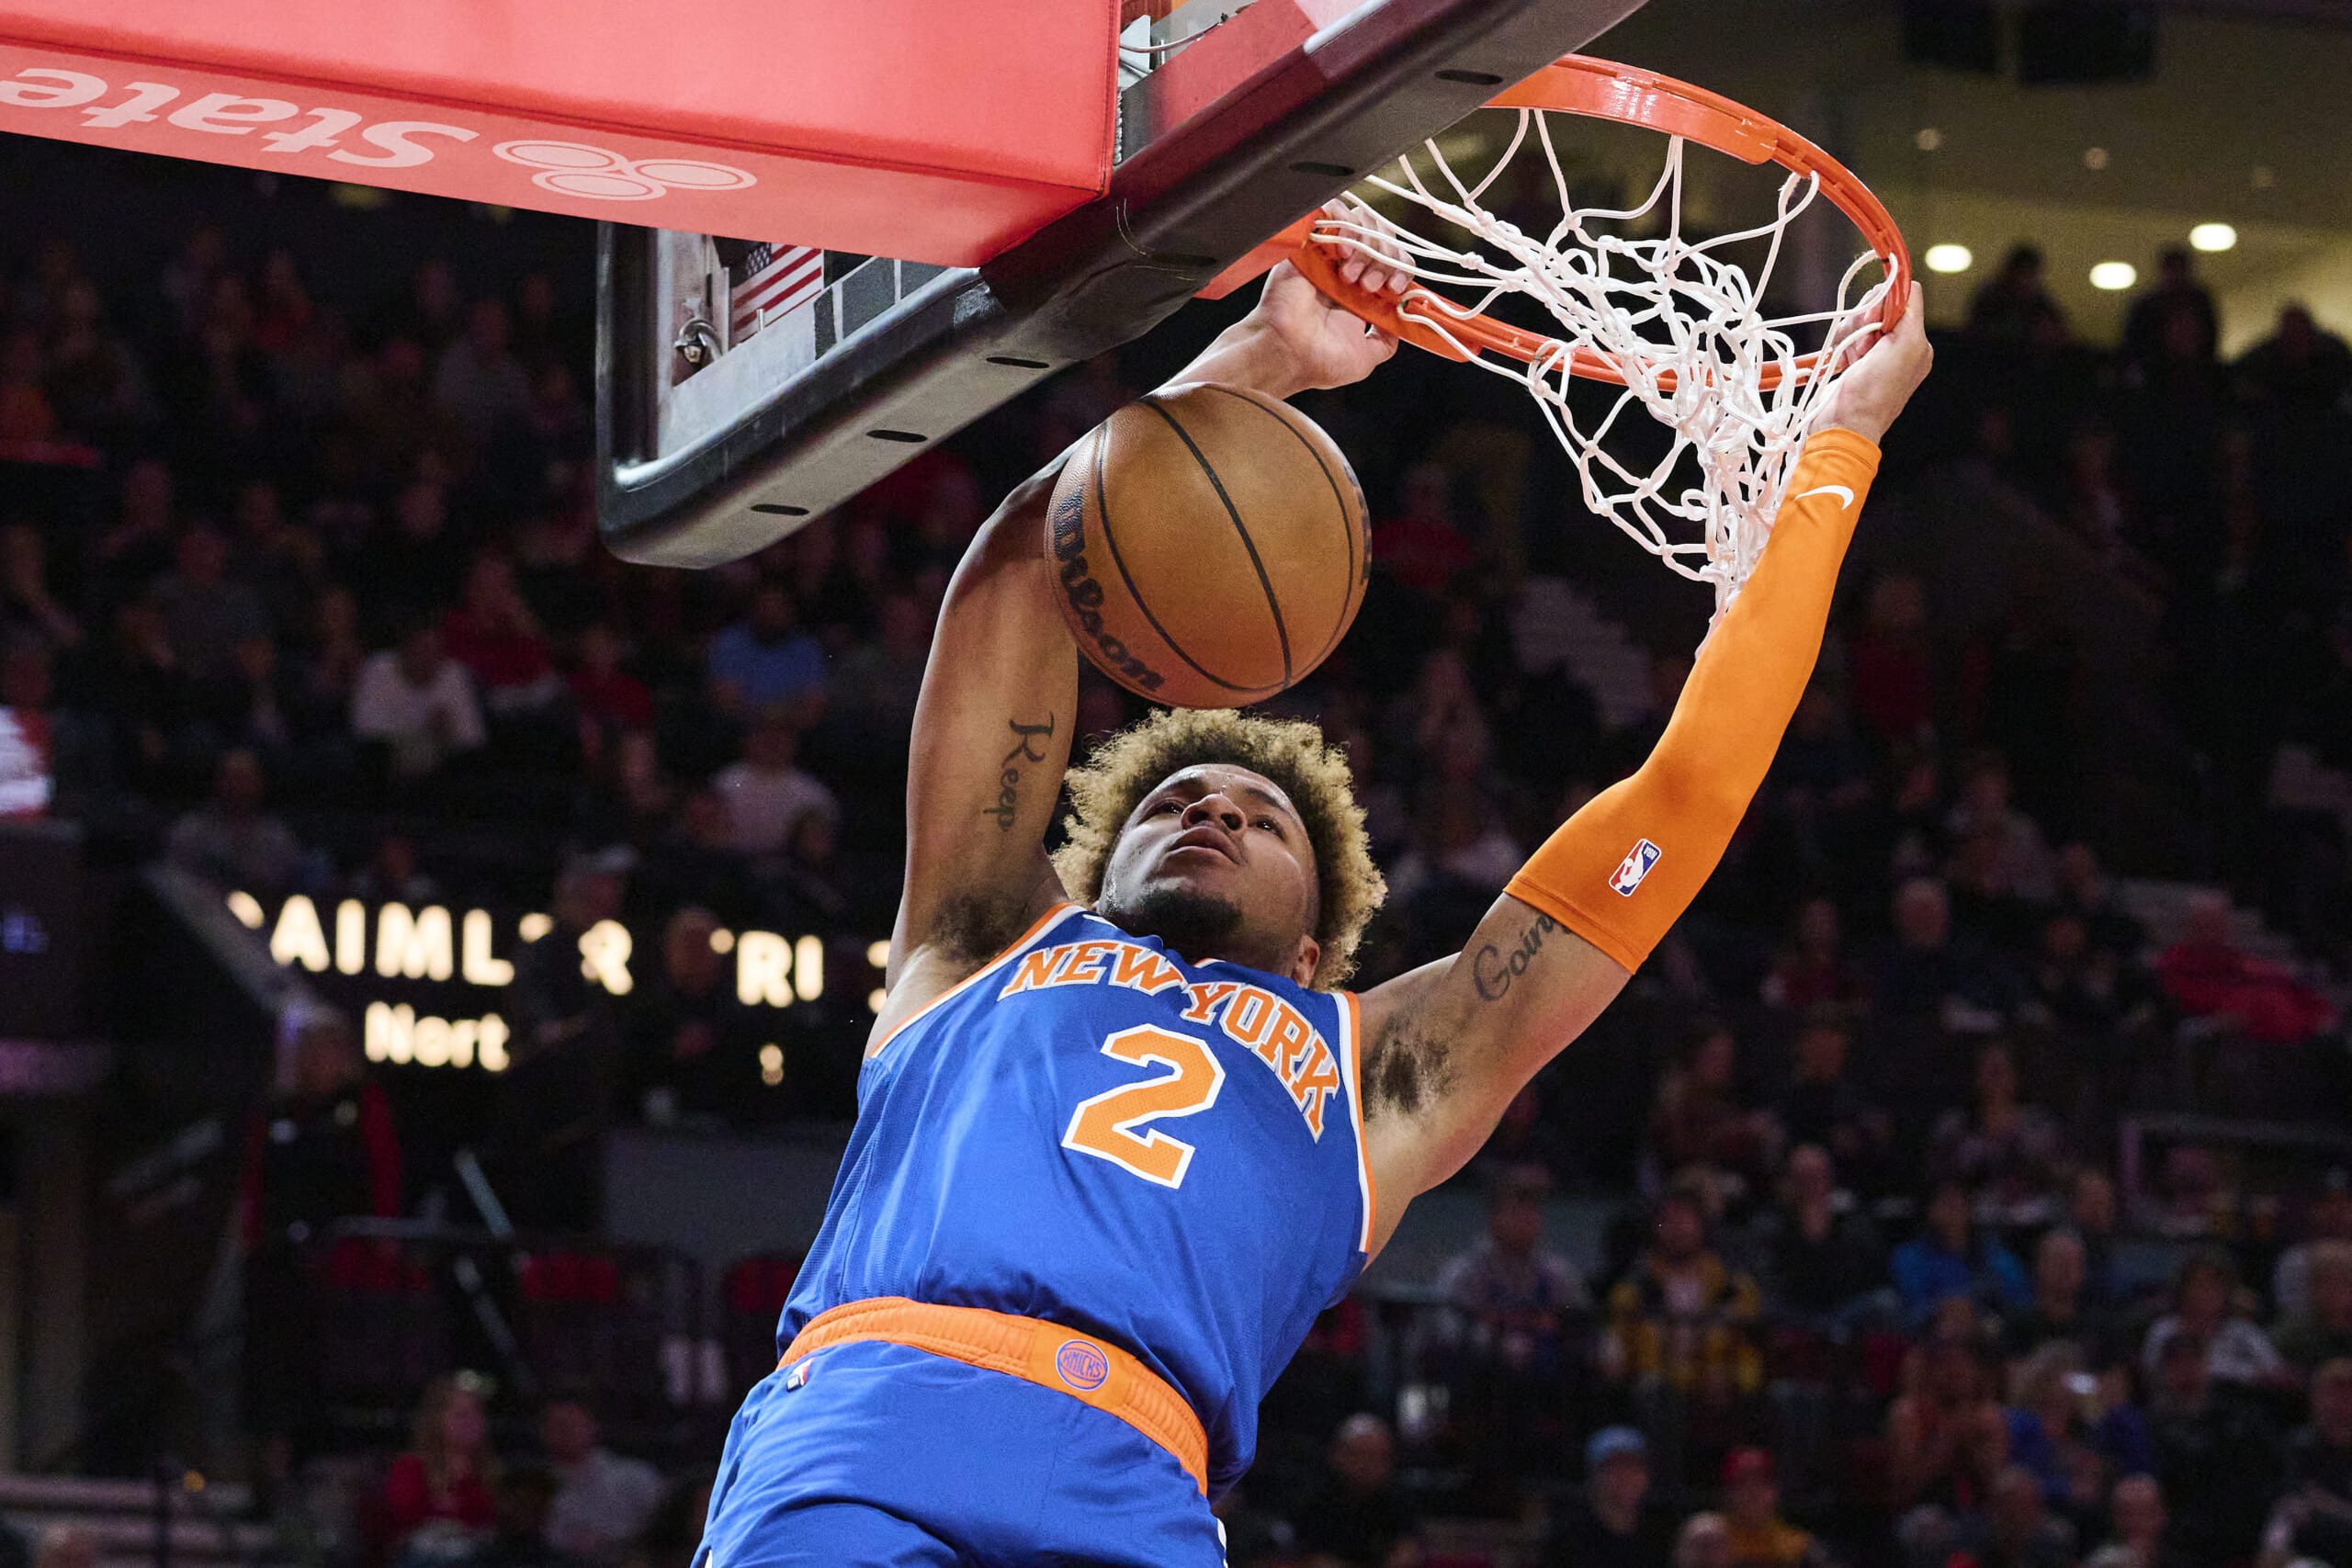 NBA - The New York Knicks pick up their 6th straight win with a W